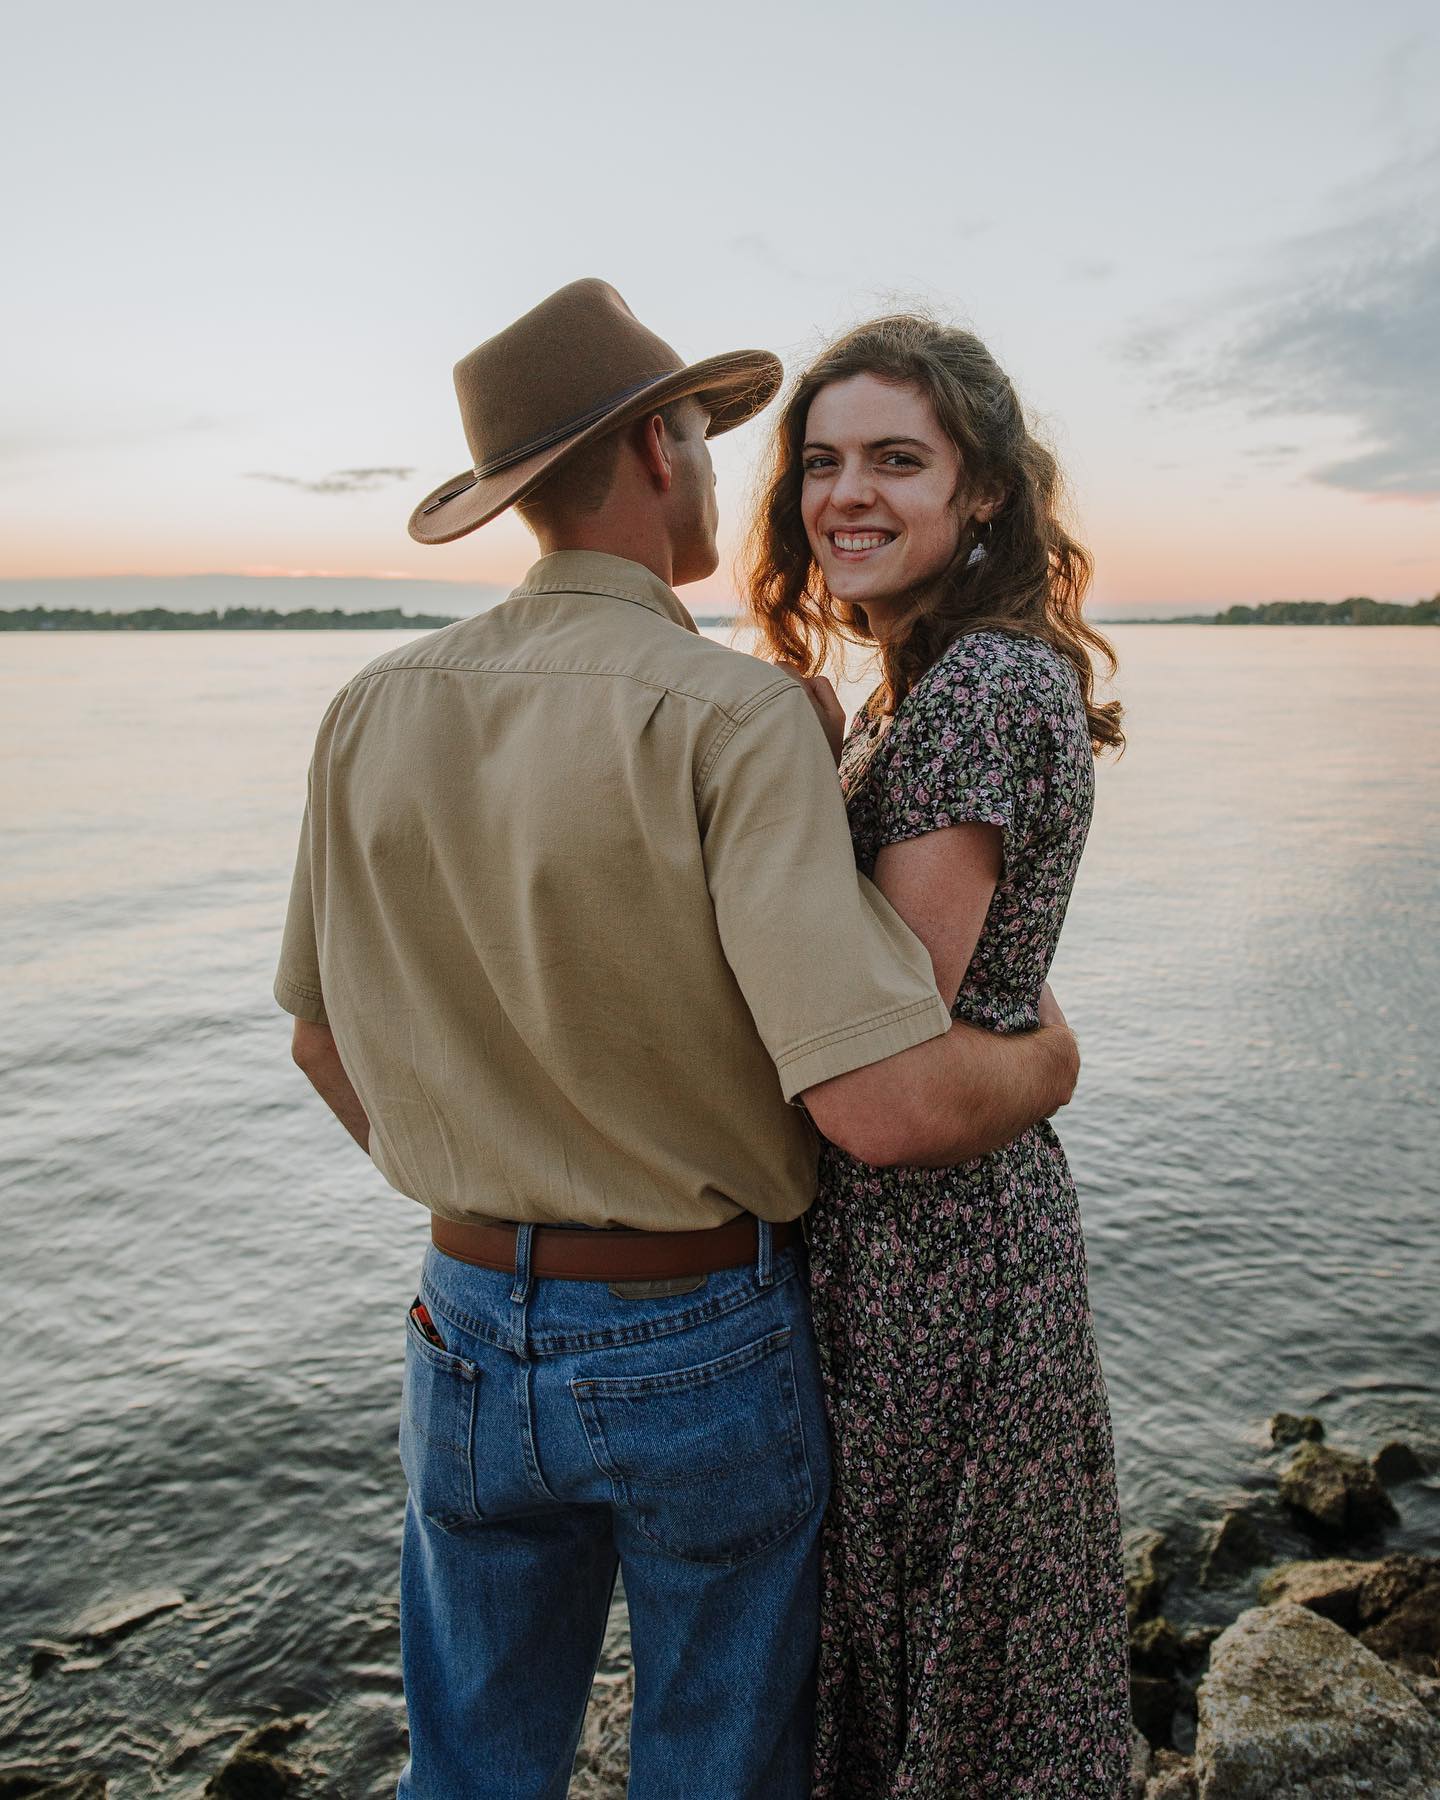 the night I took these photos there was a lady and her dog watching the sunset on the dock and it was almost as cute as these two right here. 

#portrait #sunset